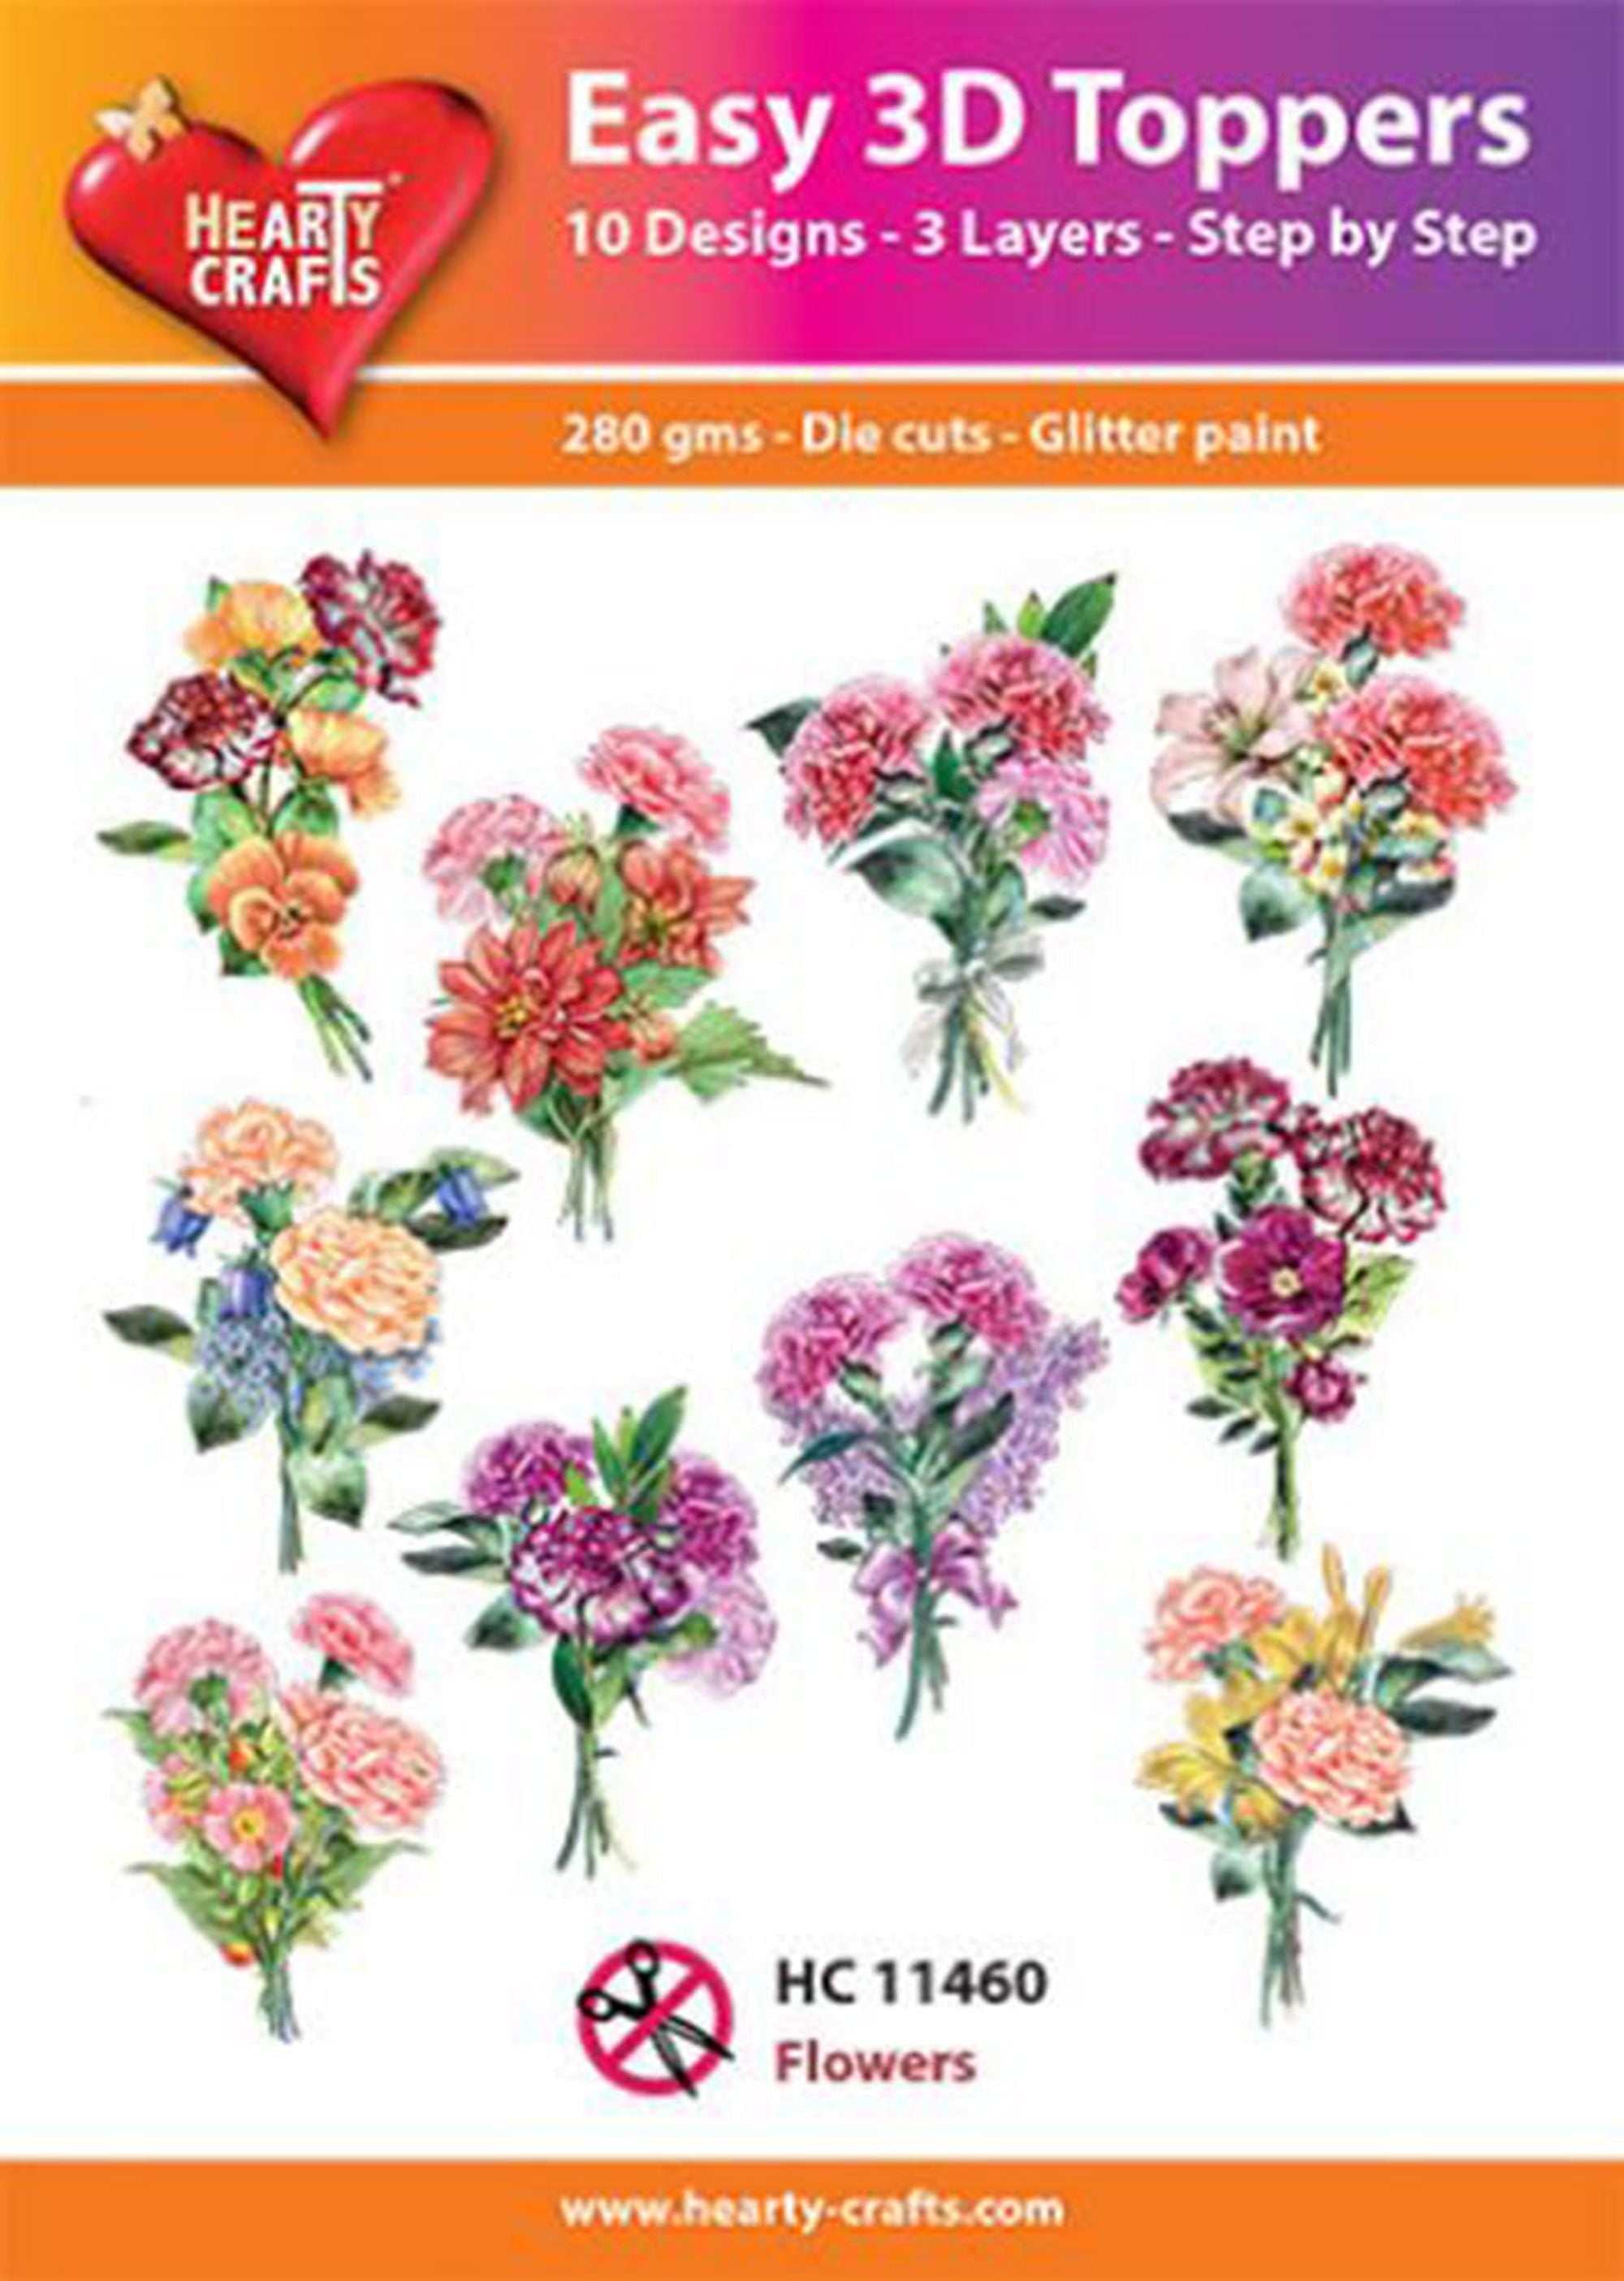 Hearty Crafts Easy 3D Toppers - Flowers